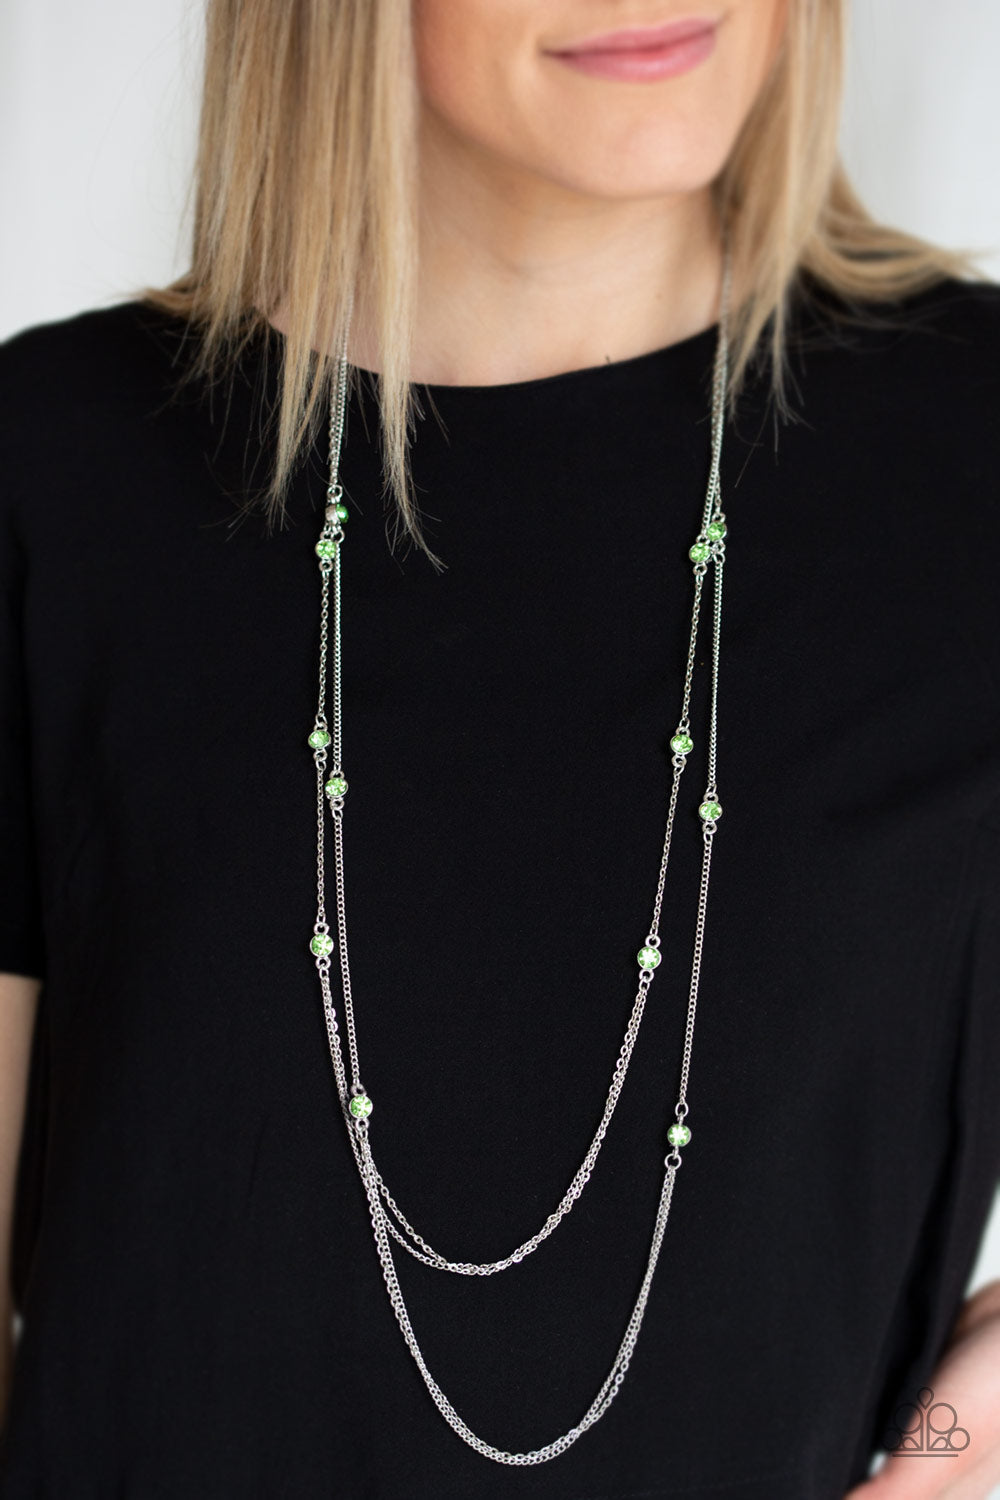 Paparazzi Sparkle Of The Day - Green Rhinestones - Silver Chains Necklace & Earrings - $5 Jewelry with Ashley Swint